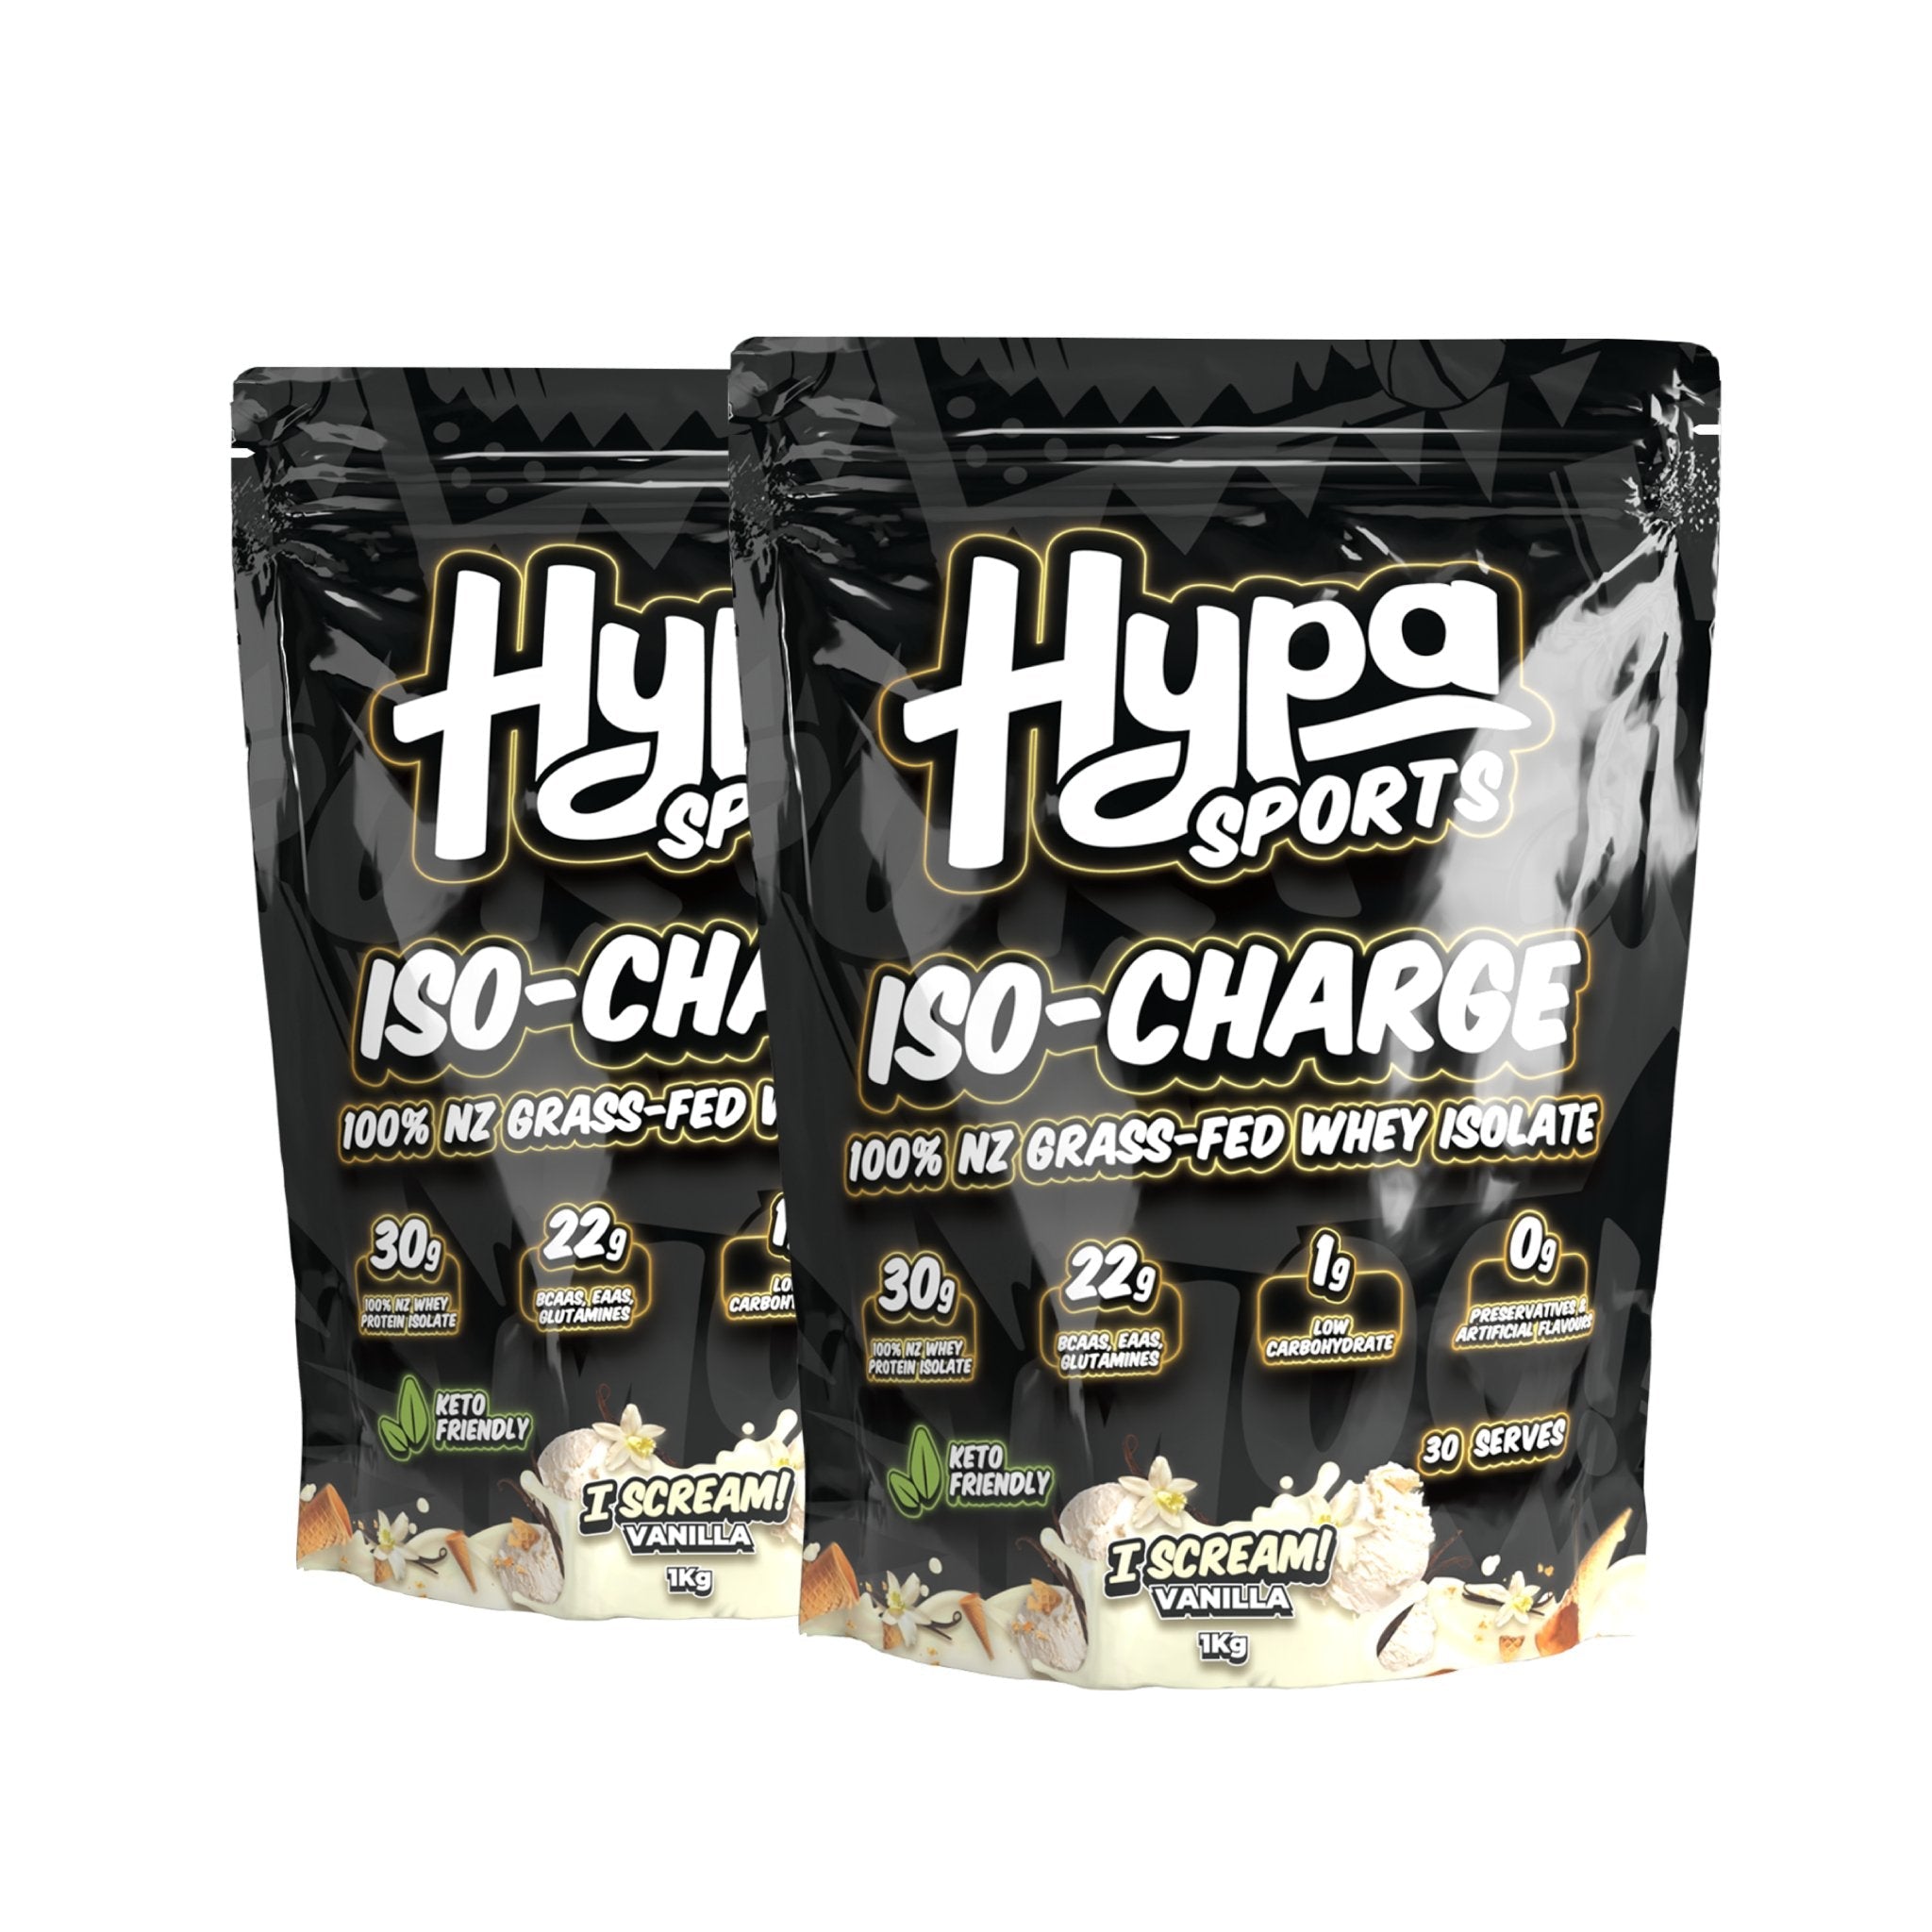 2 x Hypa Sports Iso-Charge - Hypa Christchurch - Hypa Sports